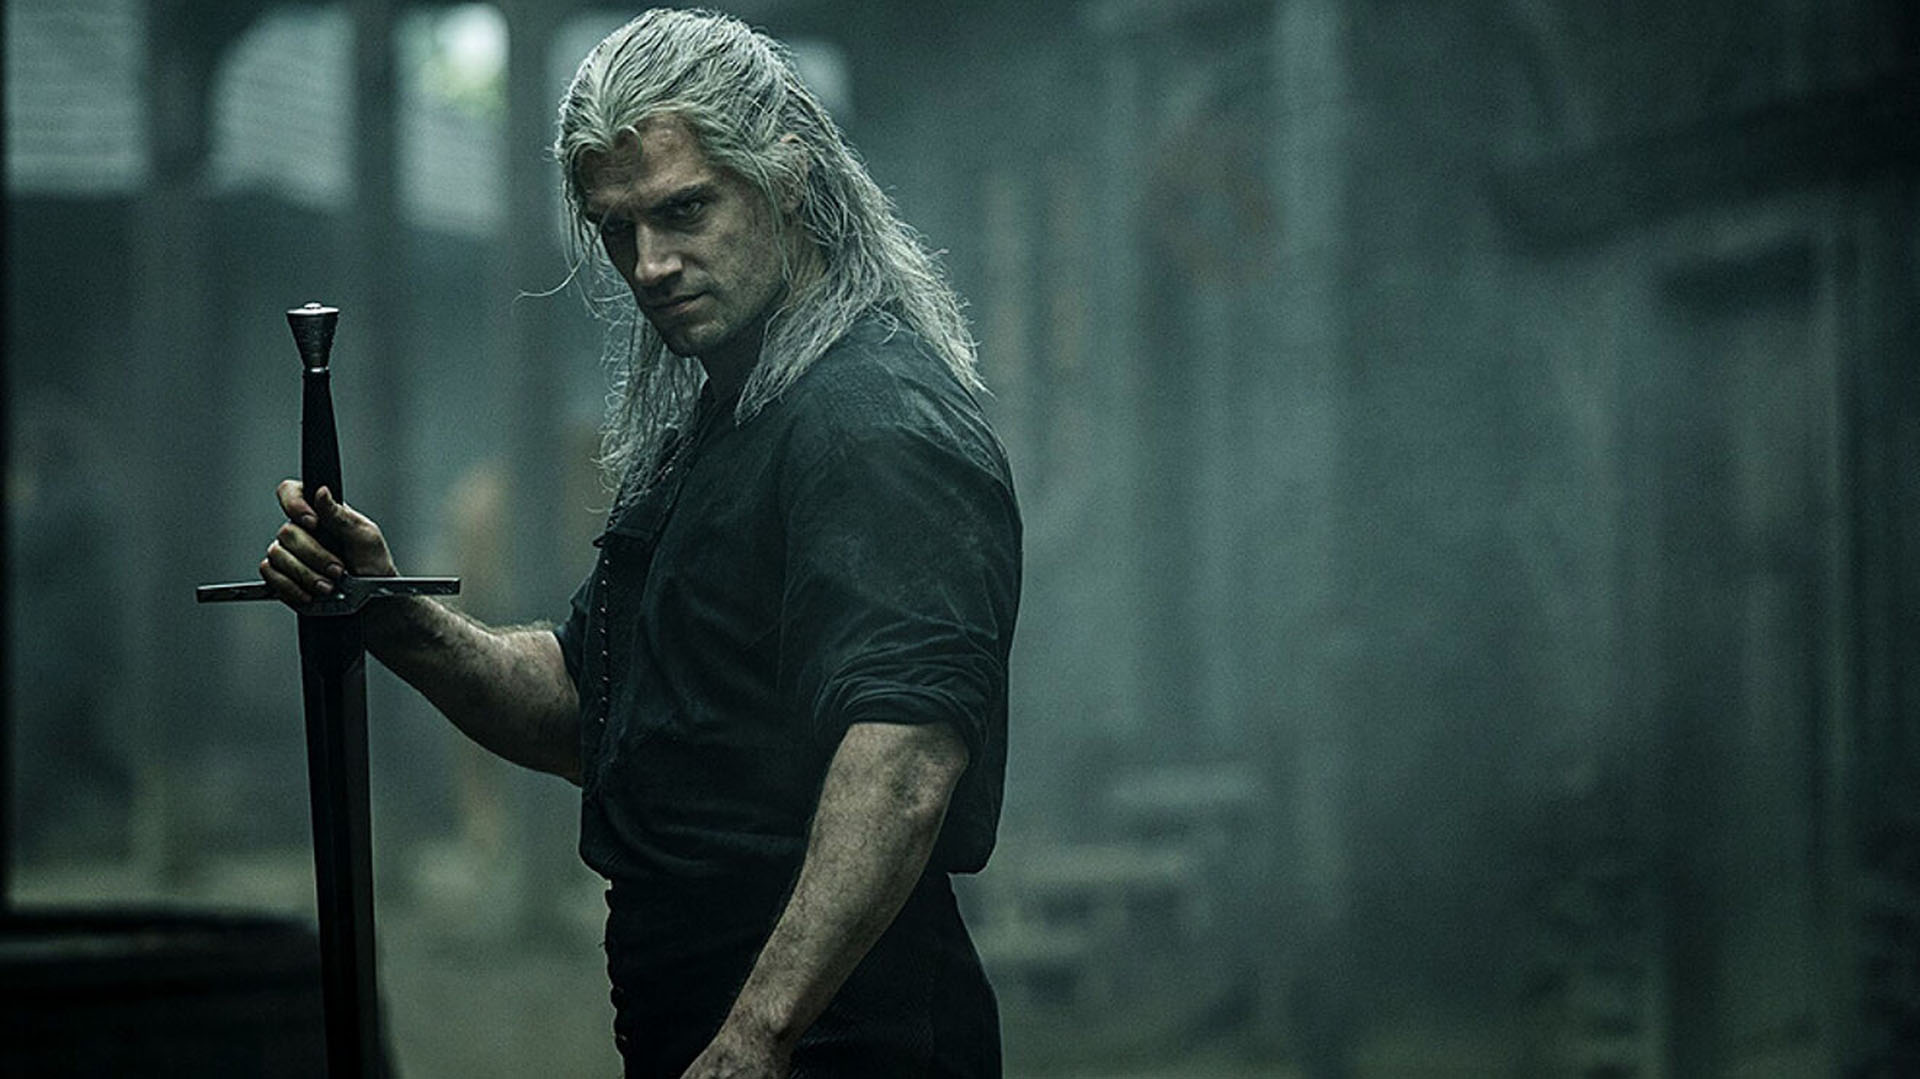 Henry Cavill, Anya Chalotra and Freya Allen will reveal the premiere date and a preview of the third season of The Witcher.